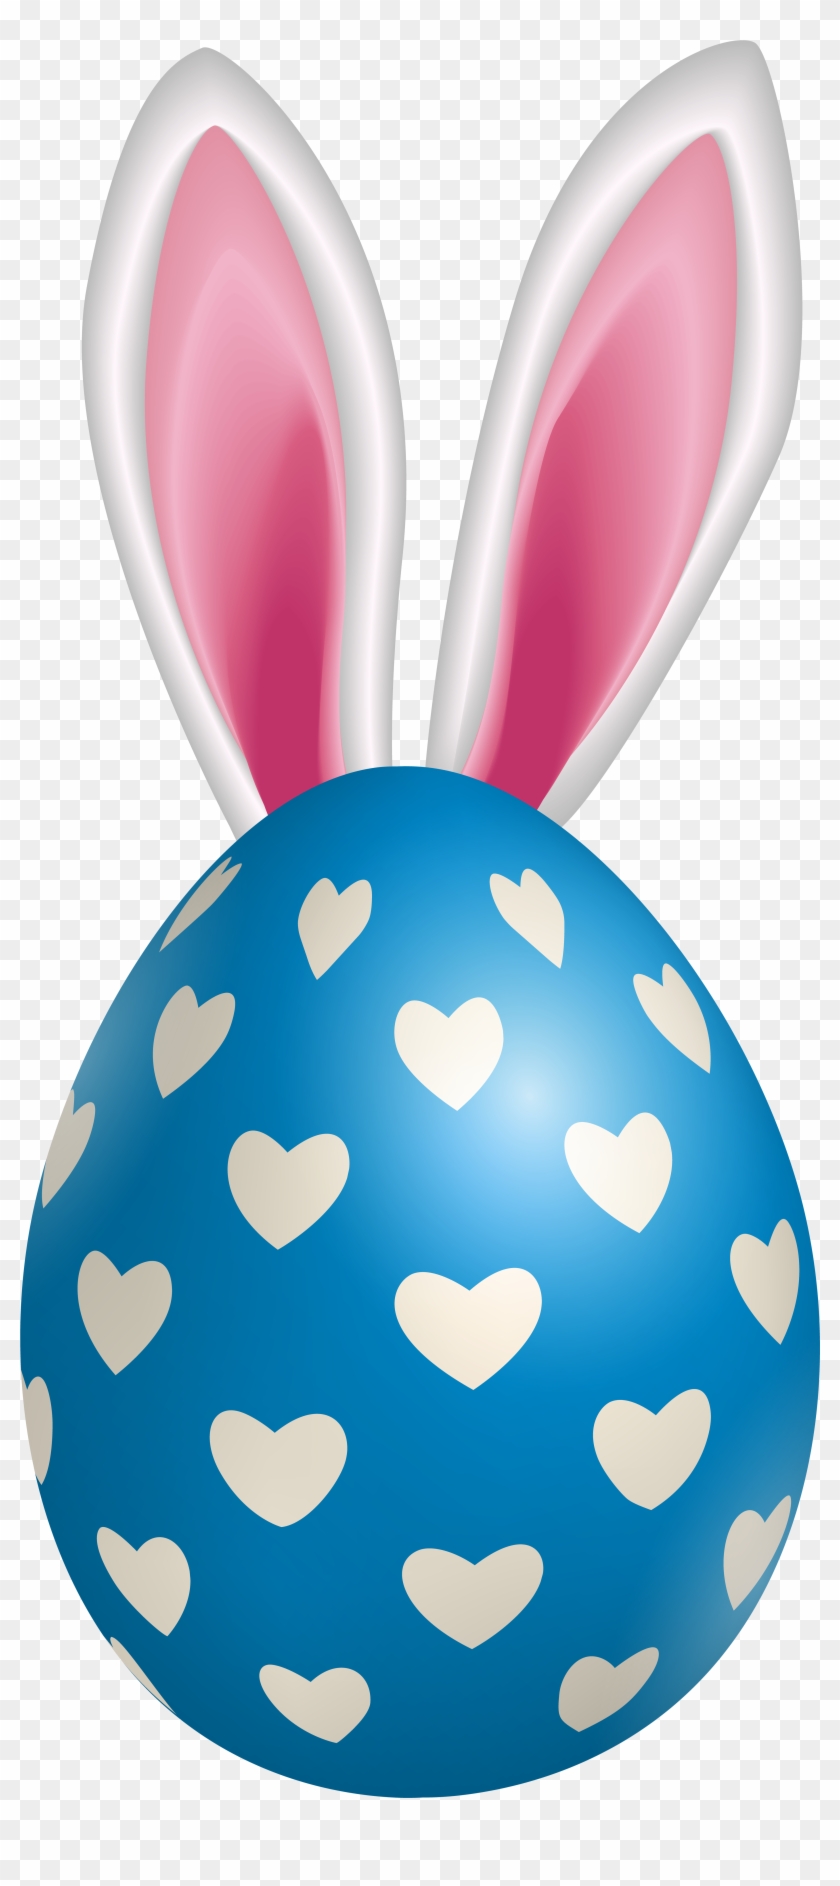 Blue Easter Egg With Hearts And Ears Png Clipart - Balloon Transparent Png #2426952